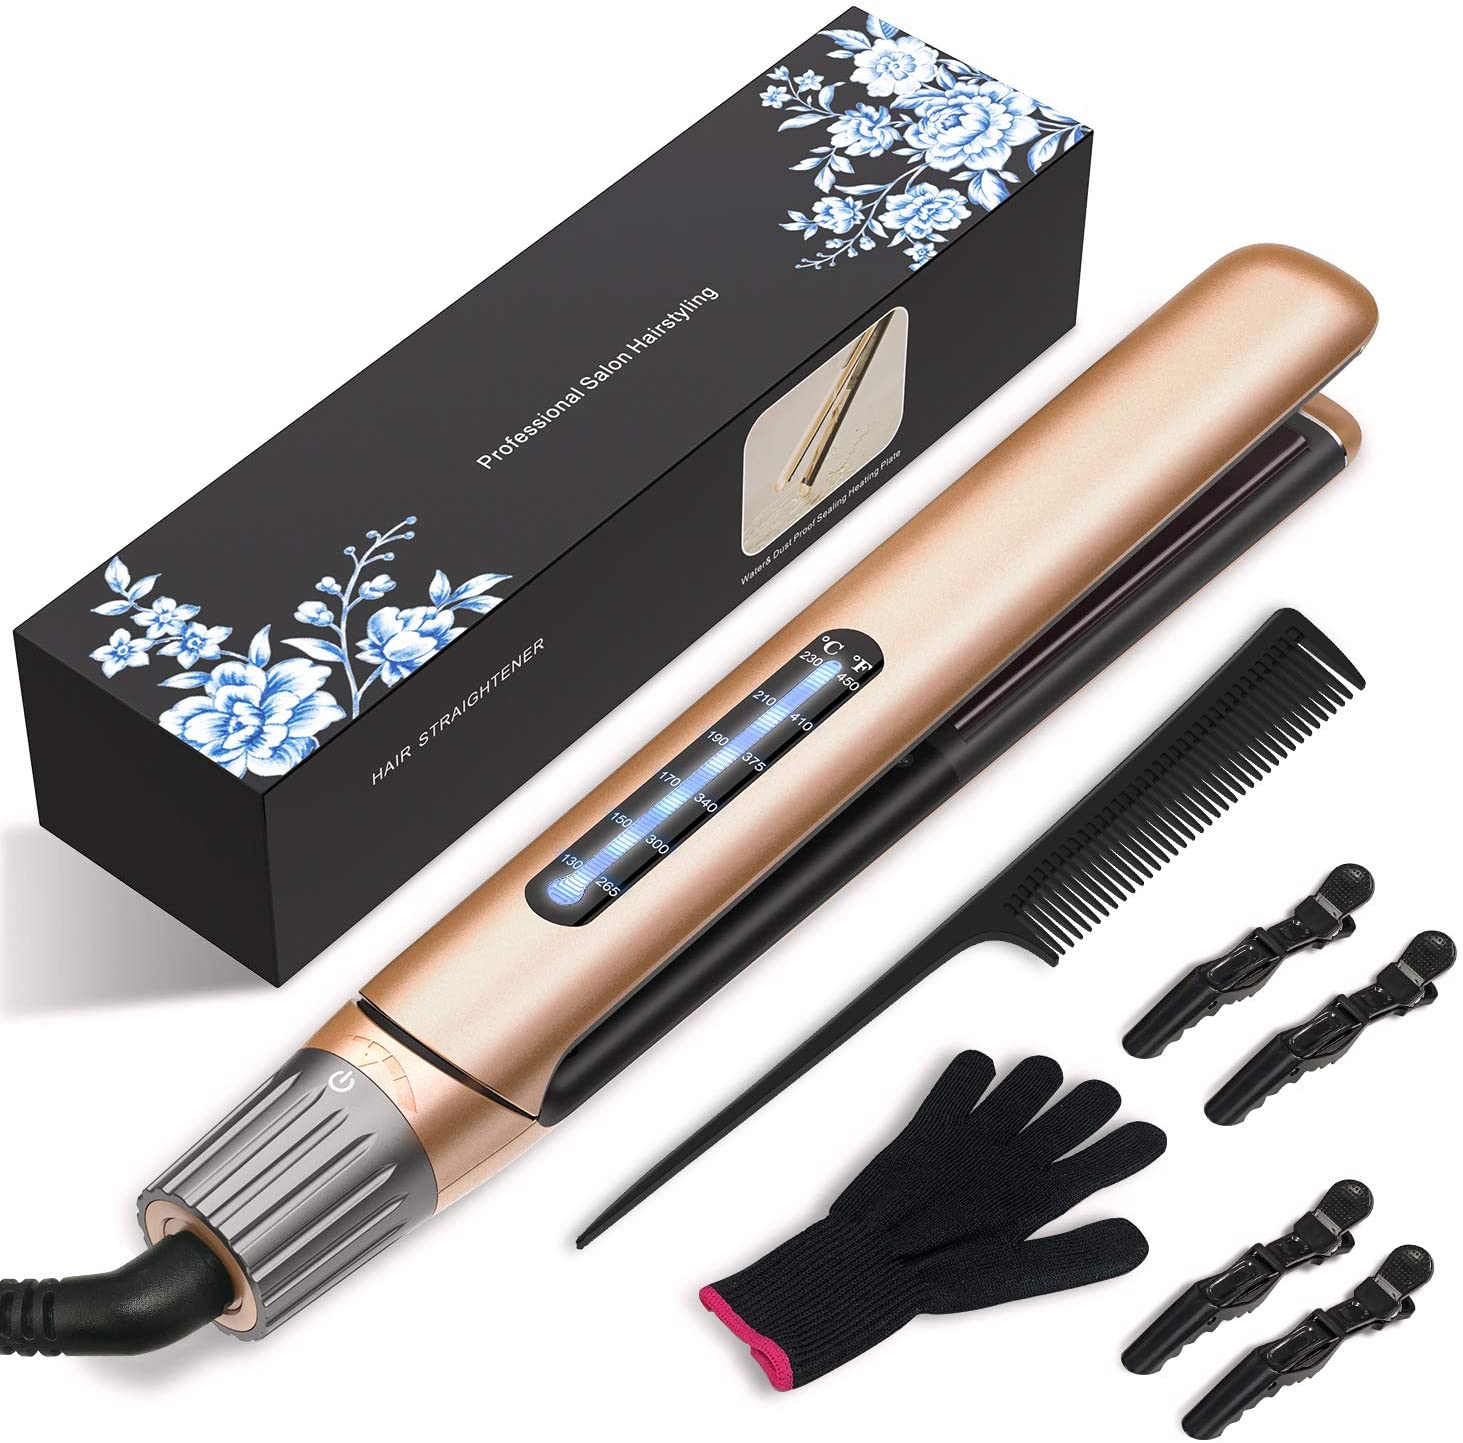 Mixcolor Hair Straightener and Curler 2 in 1